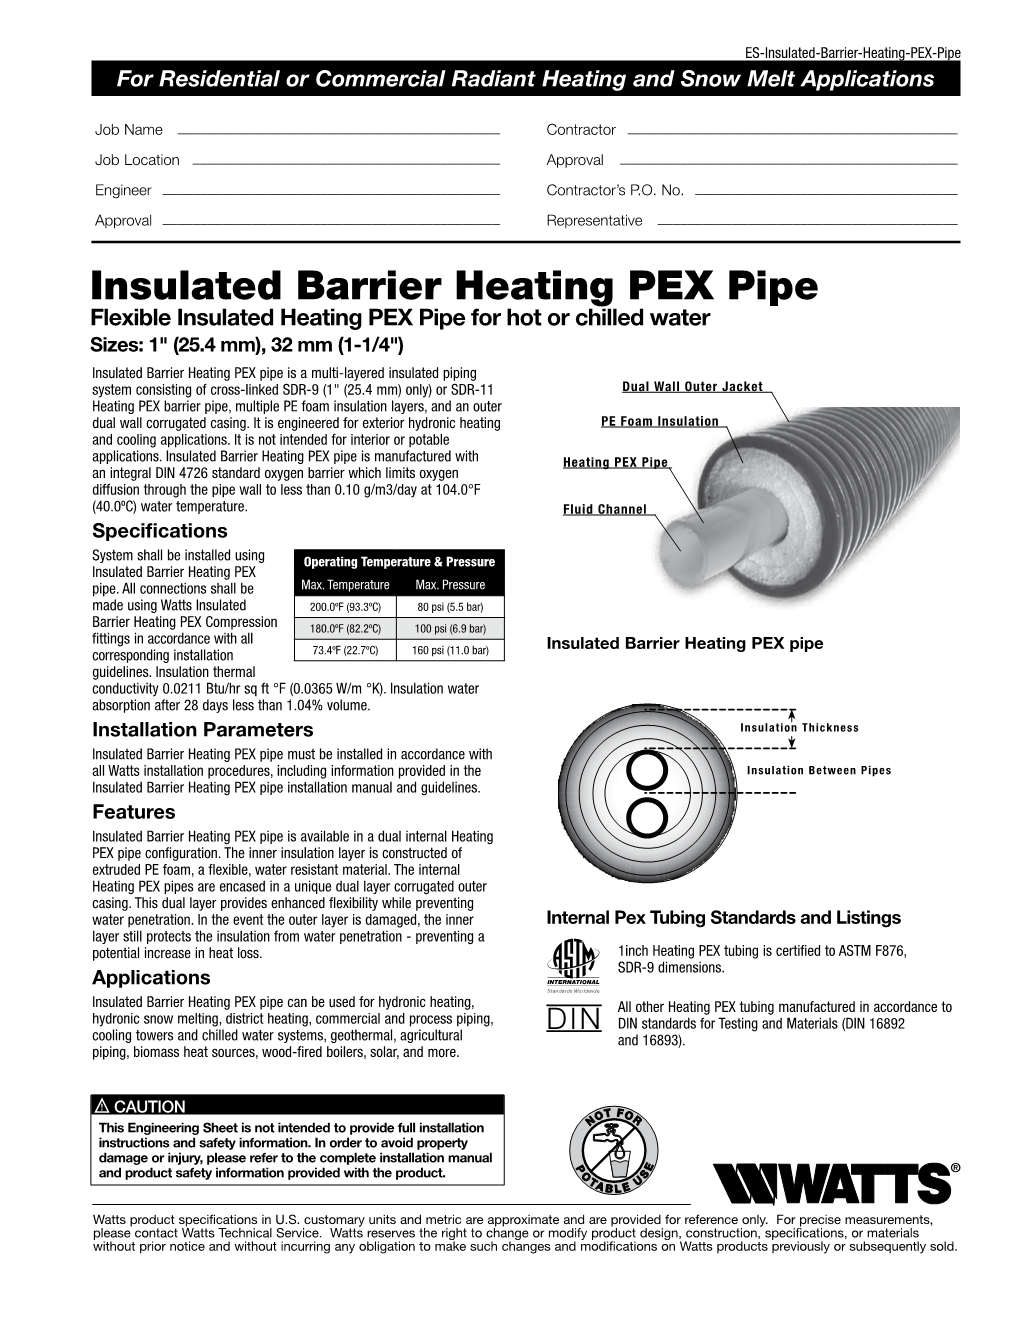 Insulated Barrier Heating PEX Pipe